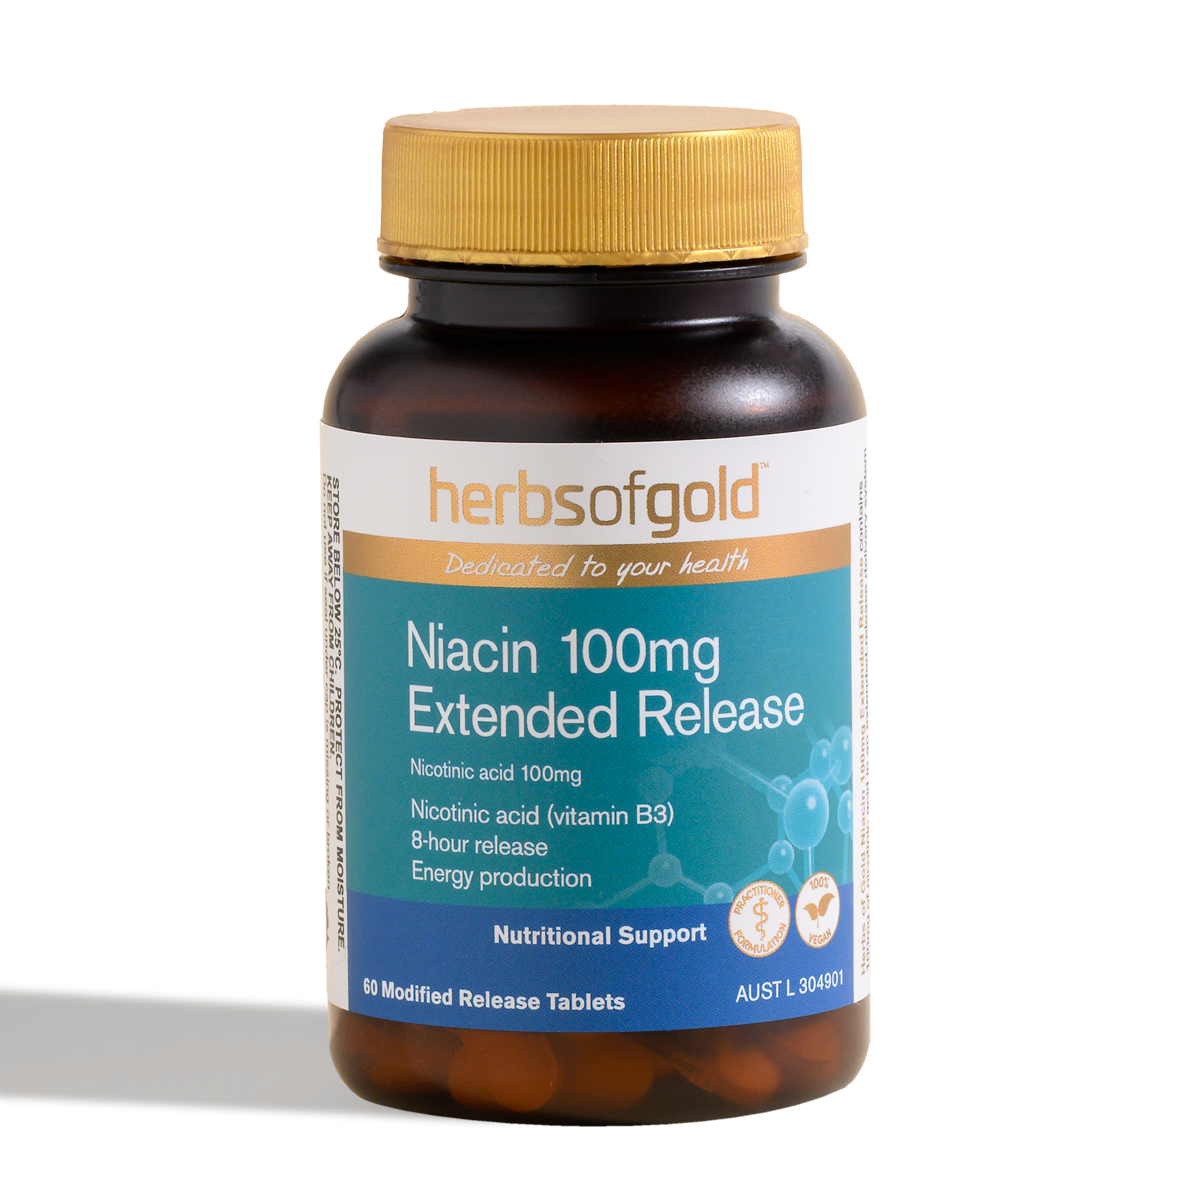 Niacin 100mg Extended Release